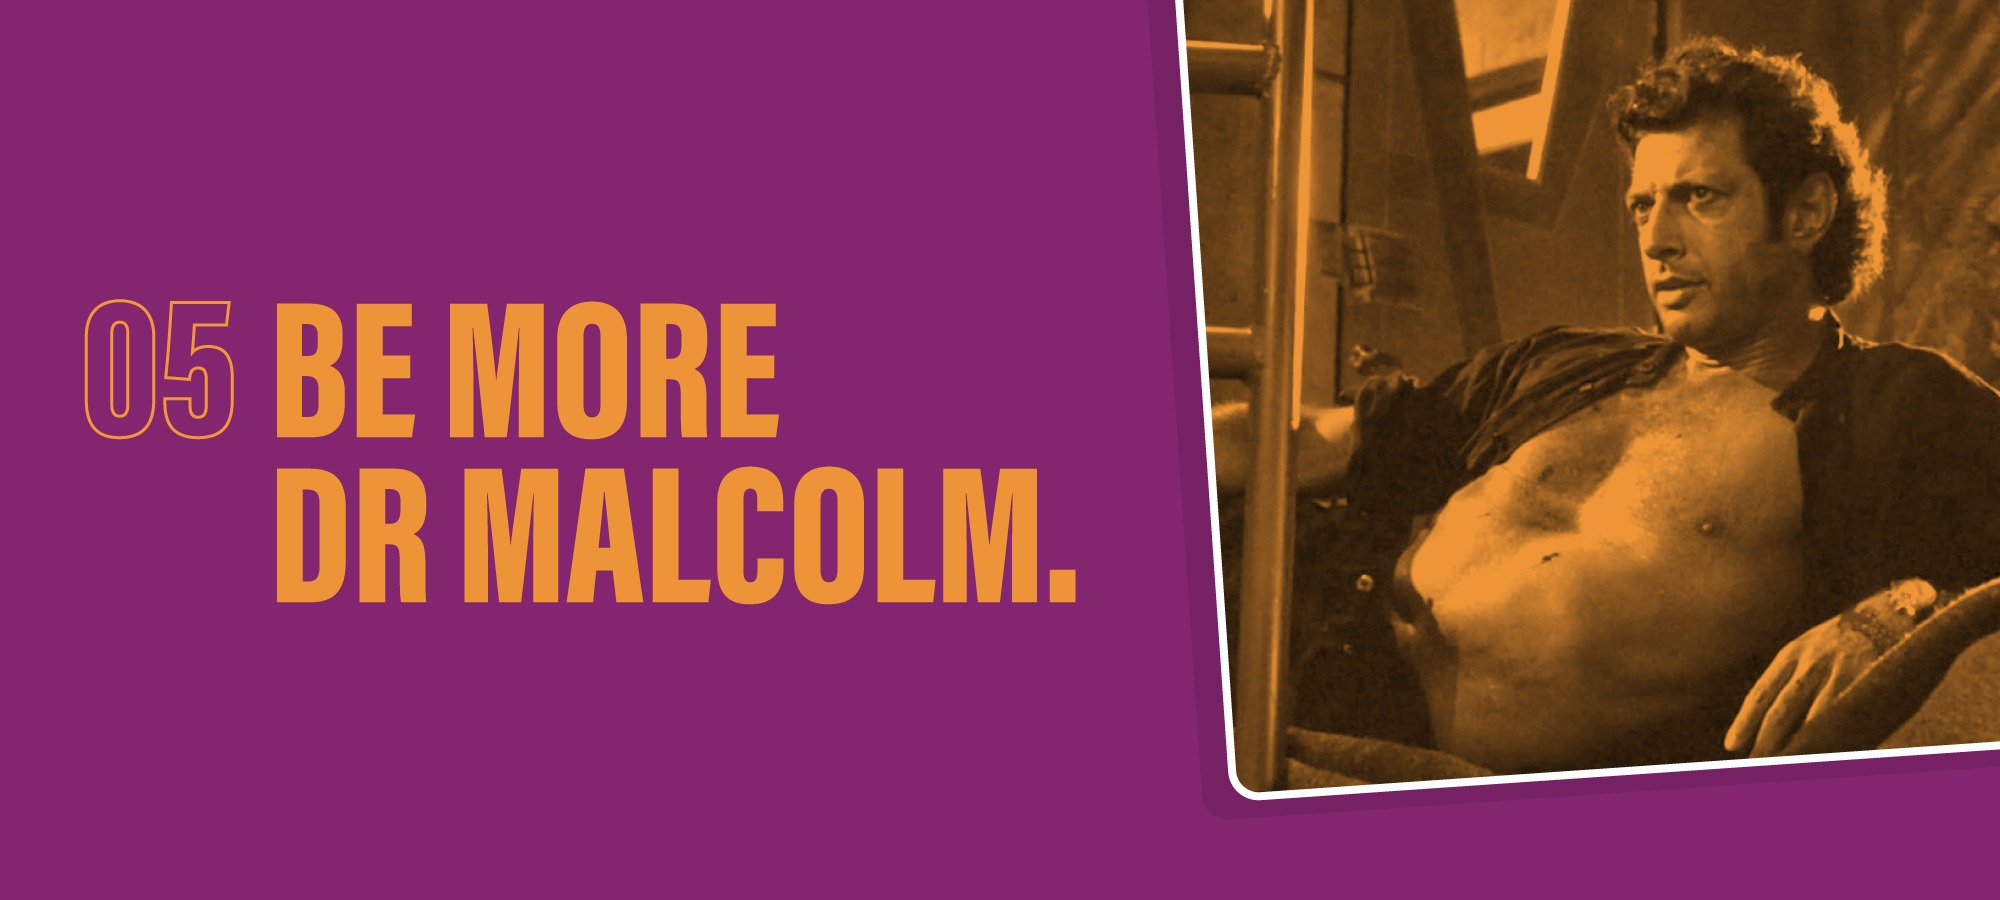 Be more Dr Malcolm